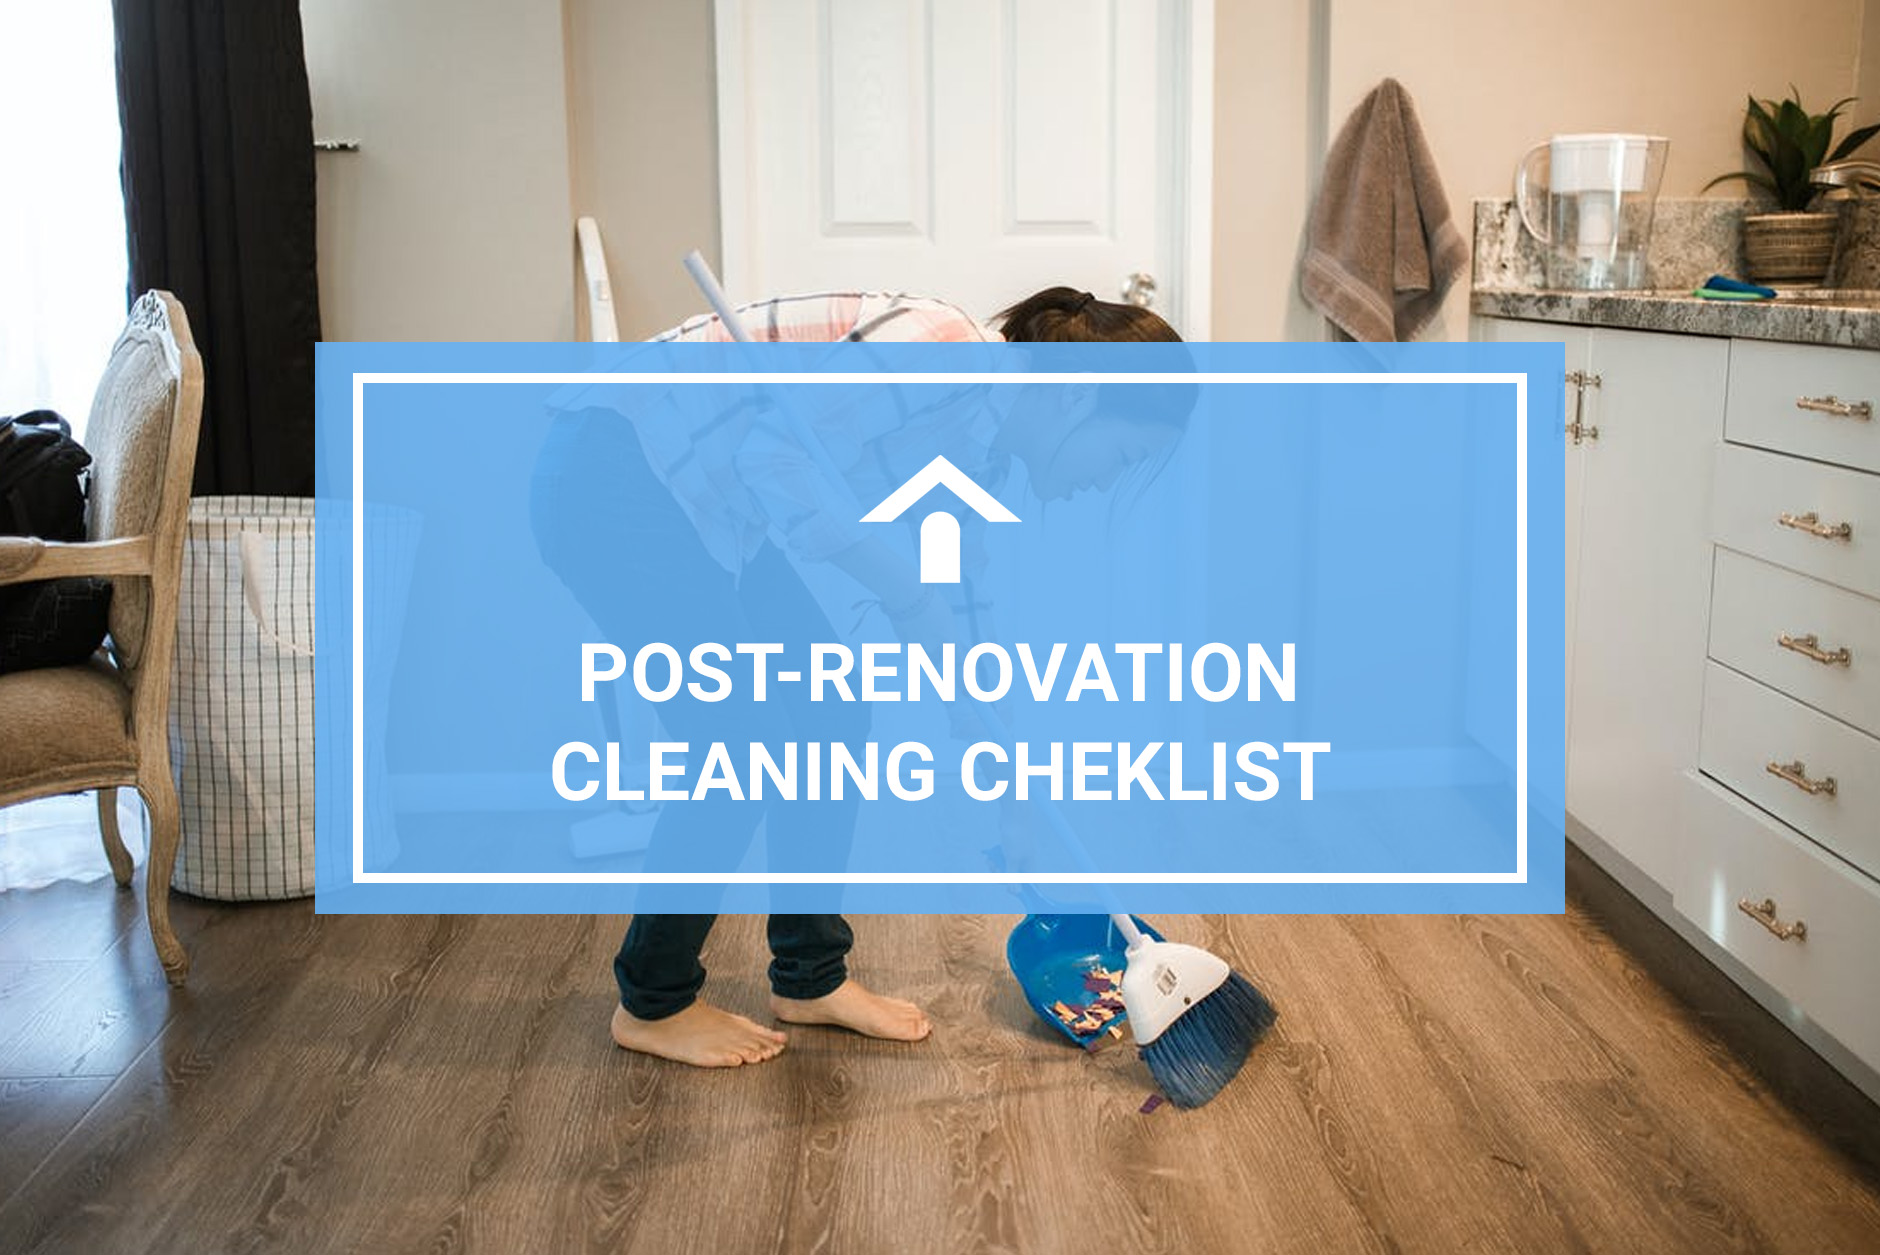 Post-Renovation Cleaning Checklist